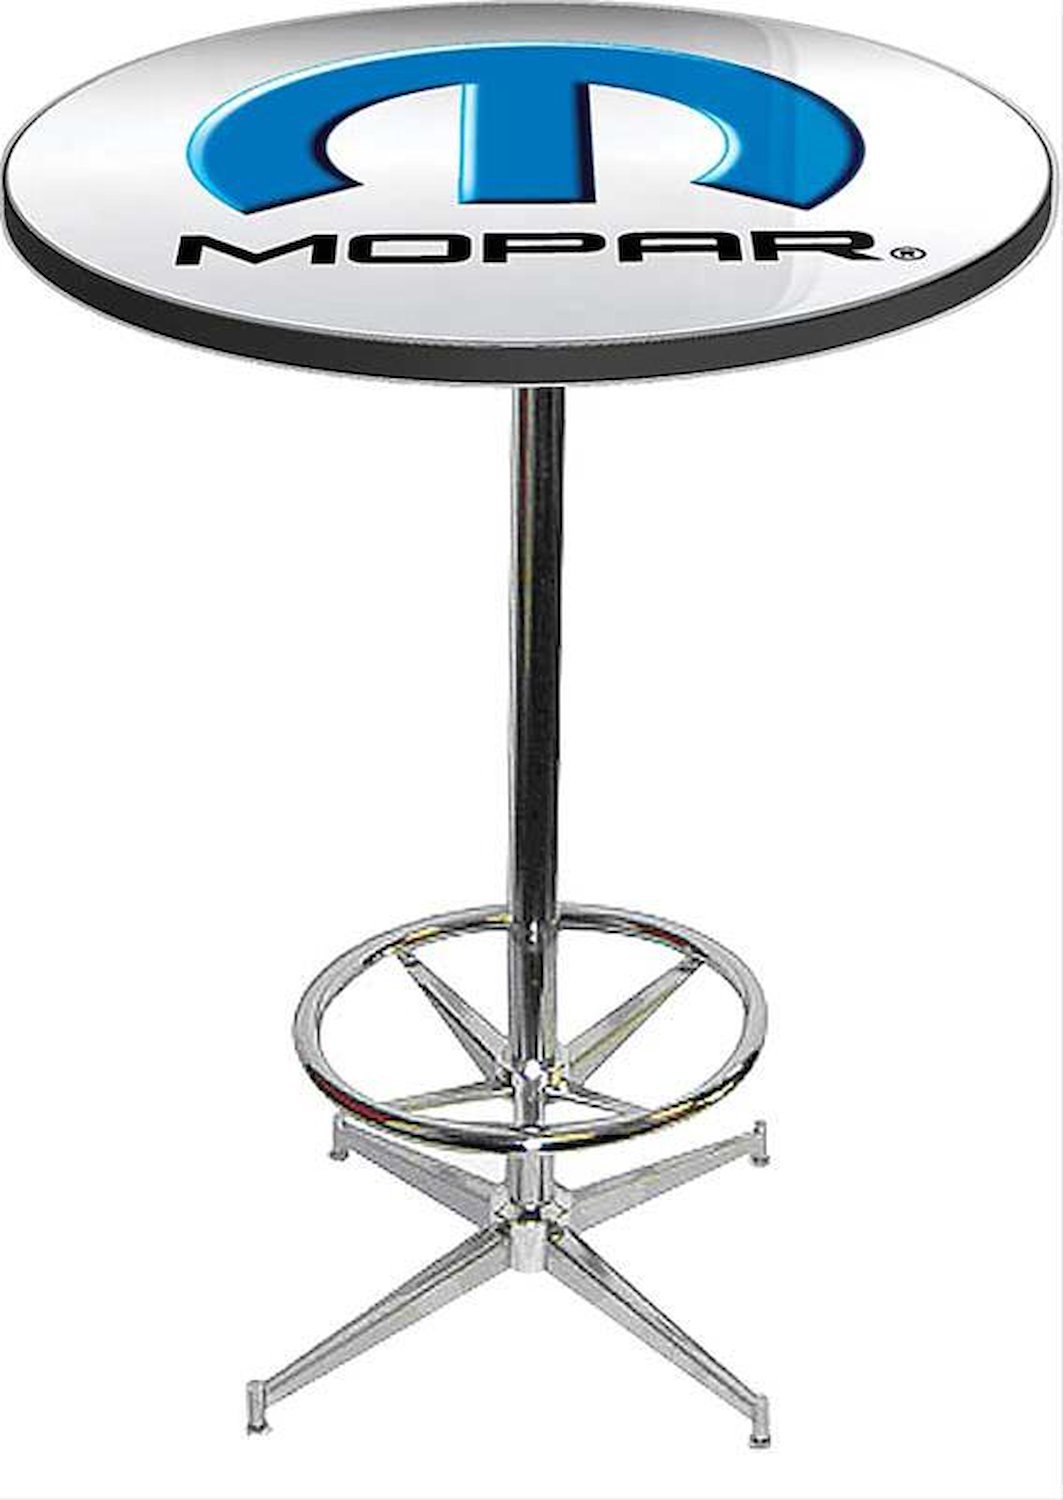 MD673108 Pub Table With Chrome Base And Foot Rest 2001-13 Style Mopar Omega Logo Pub Table With Chrome Base And Foot Rest